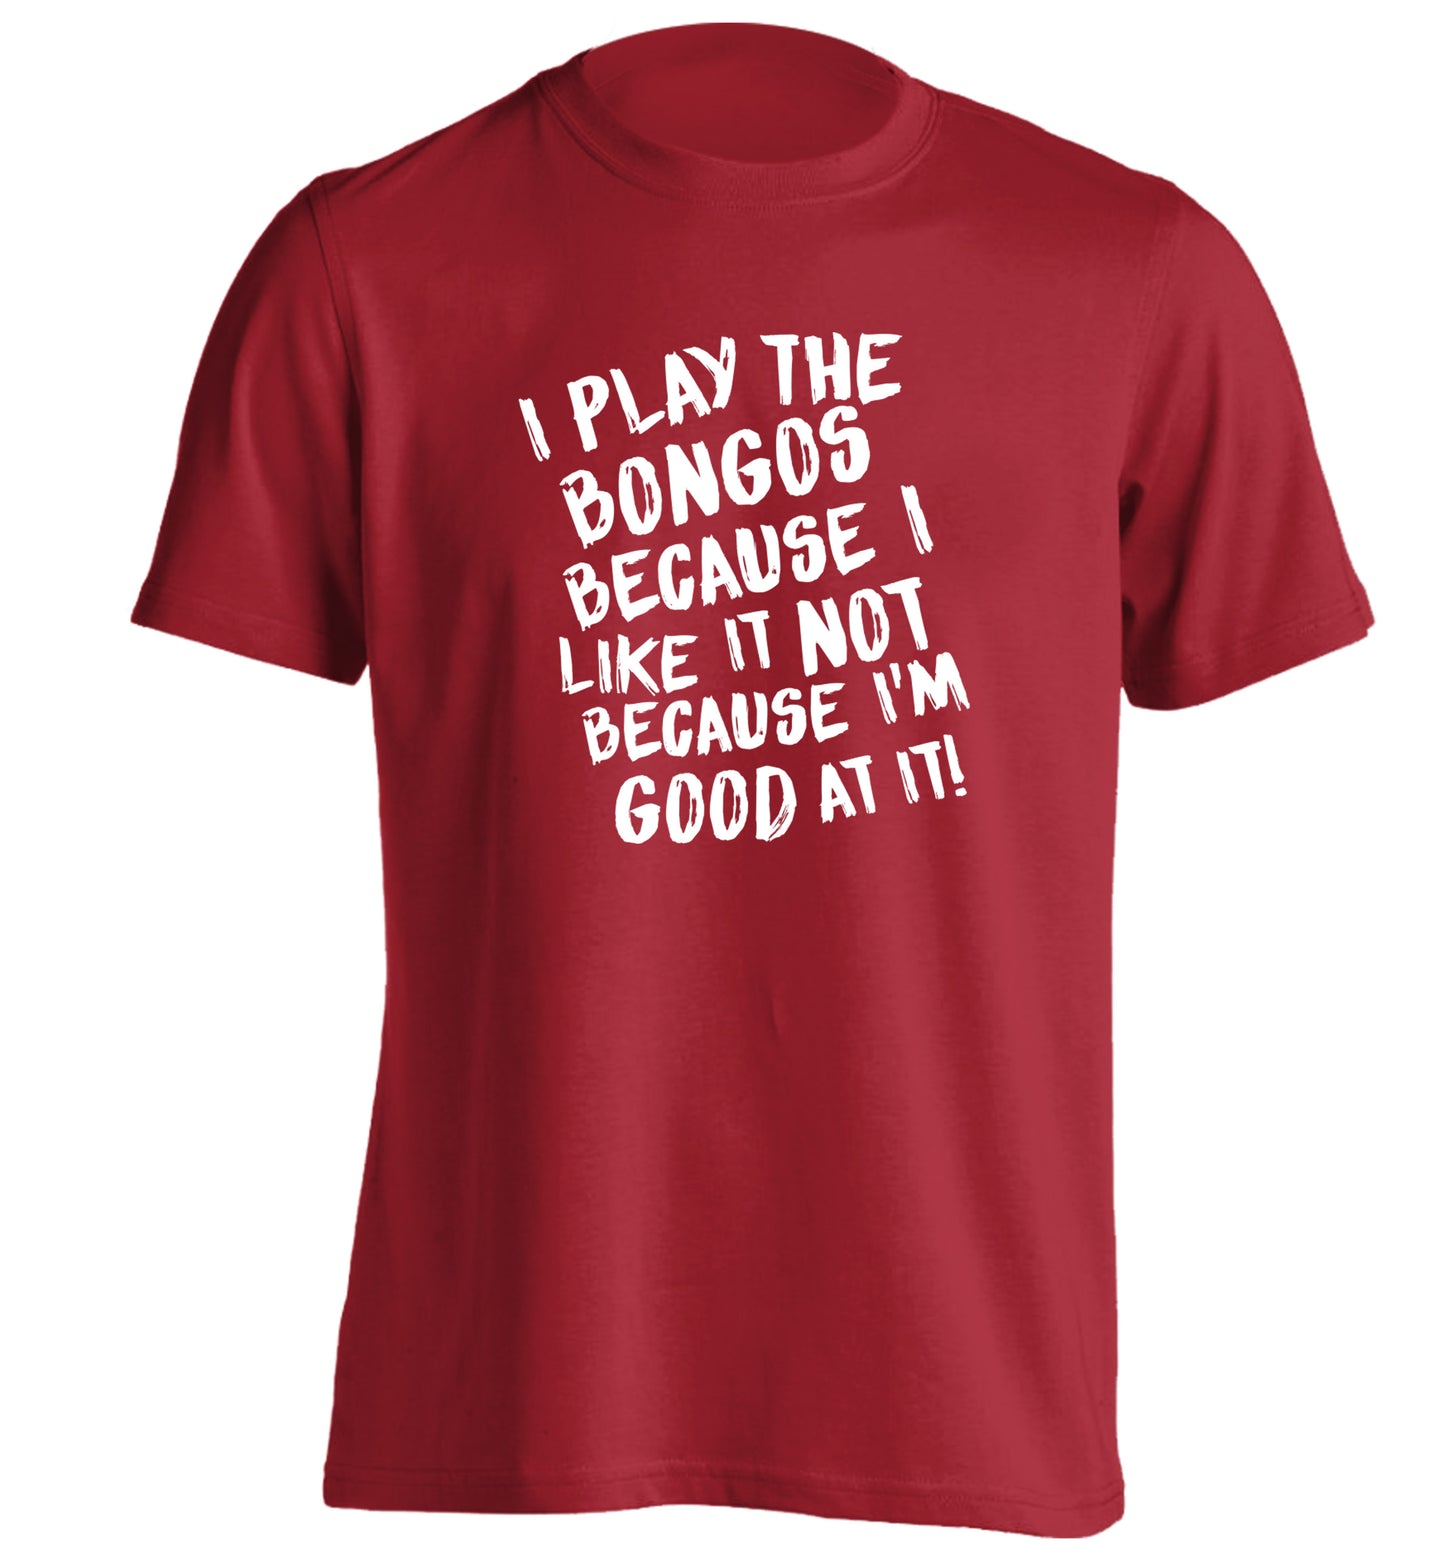 I play the bongos because I like it not because I'm good at it adults unisex red Tshirt 2XL